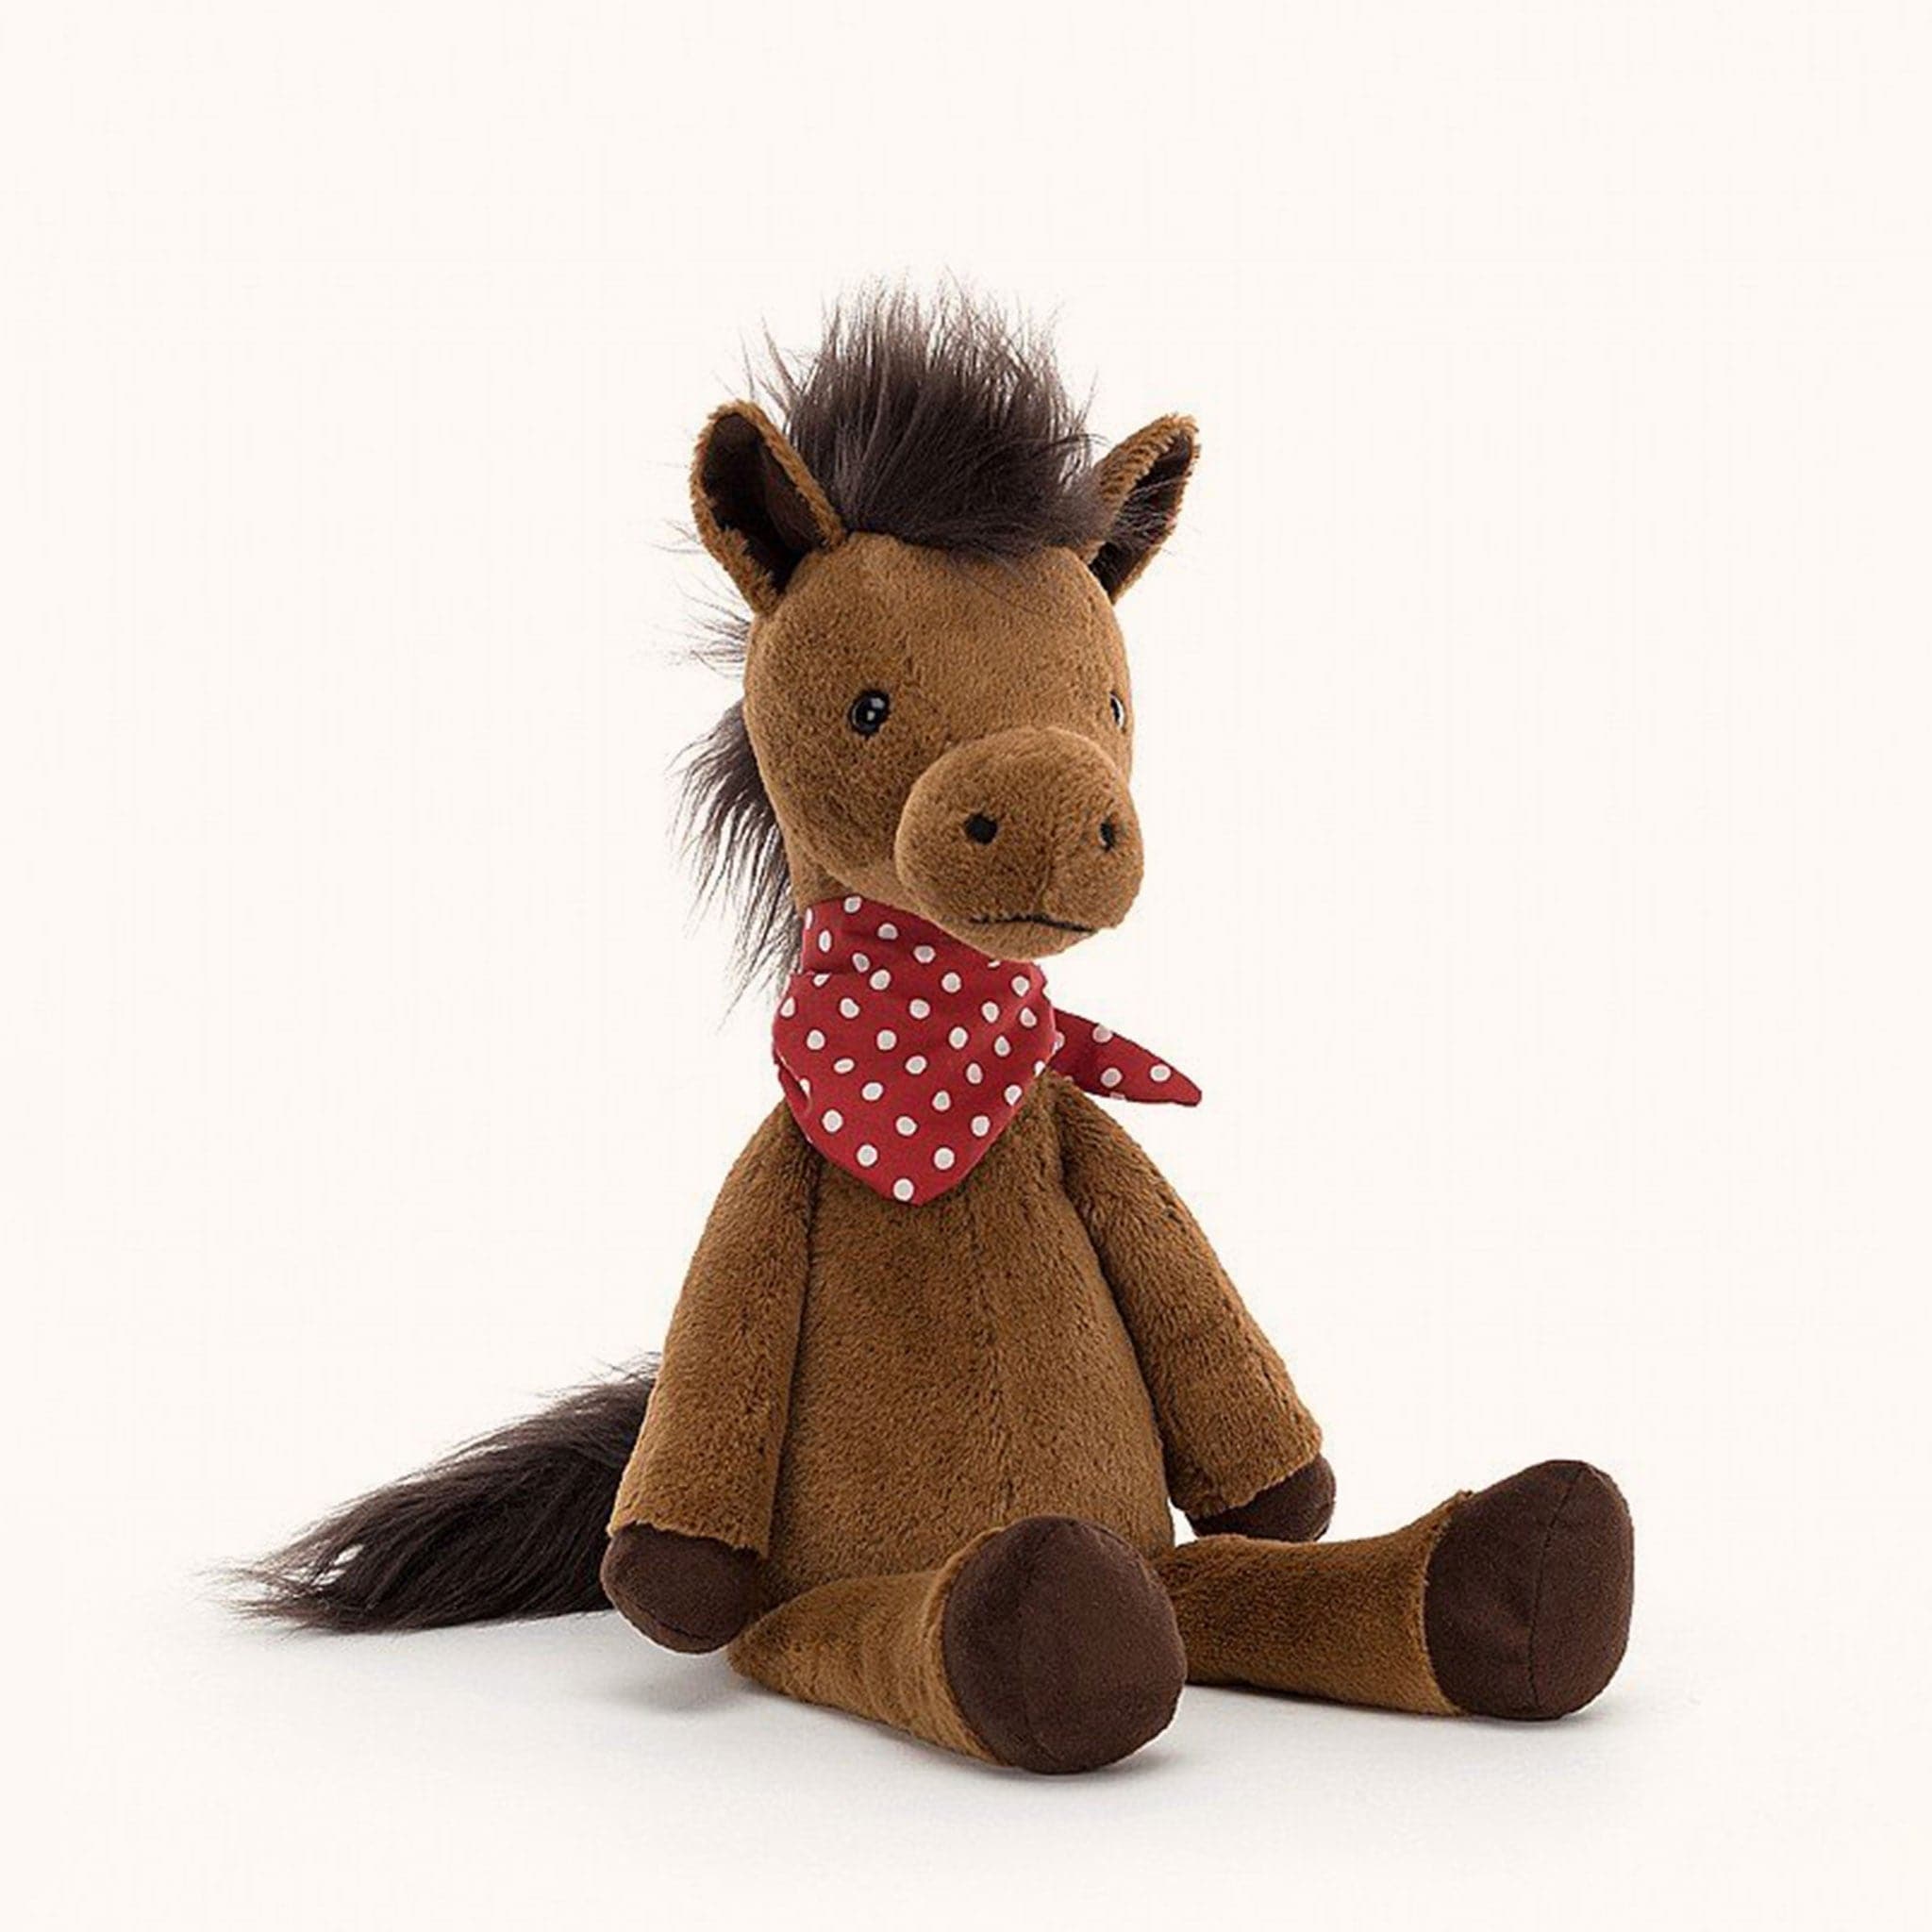 Soft stuffed animal in the shape of a brown horse with fluffy dark brown mane and tail, and wearing a red and white spotted bandana around its neck.